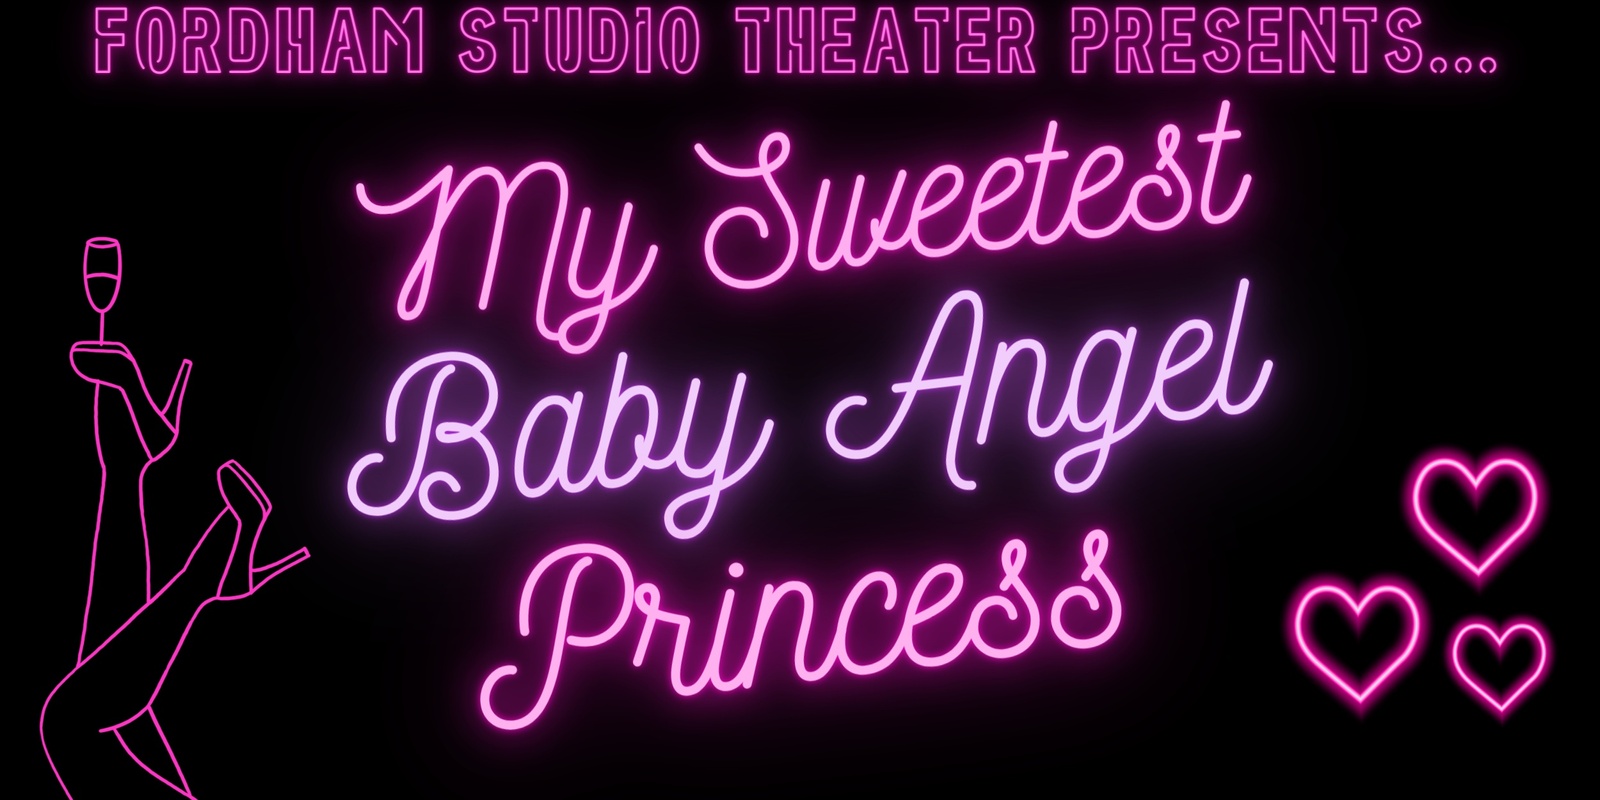 Banner image for My Sweetest Baby Angel Princess